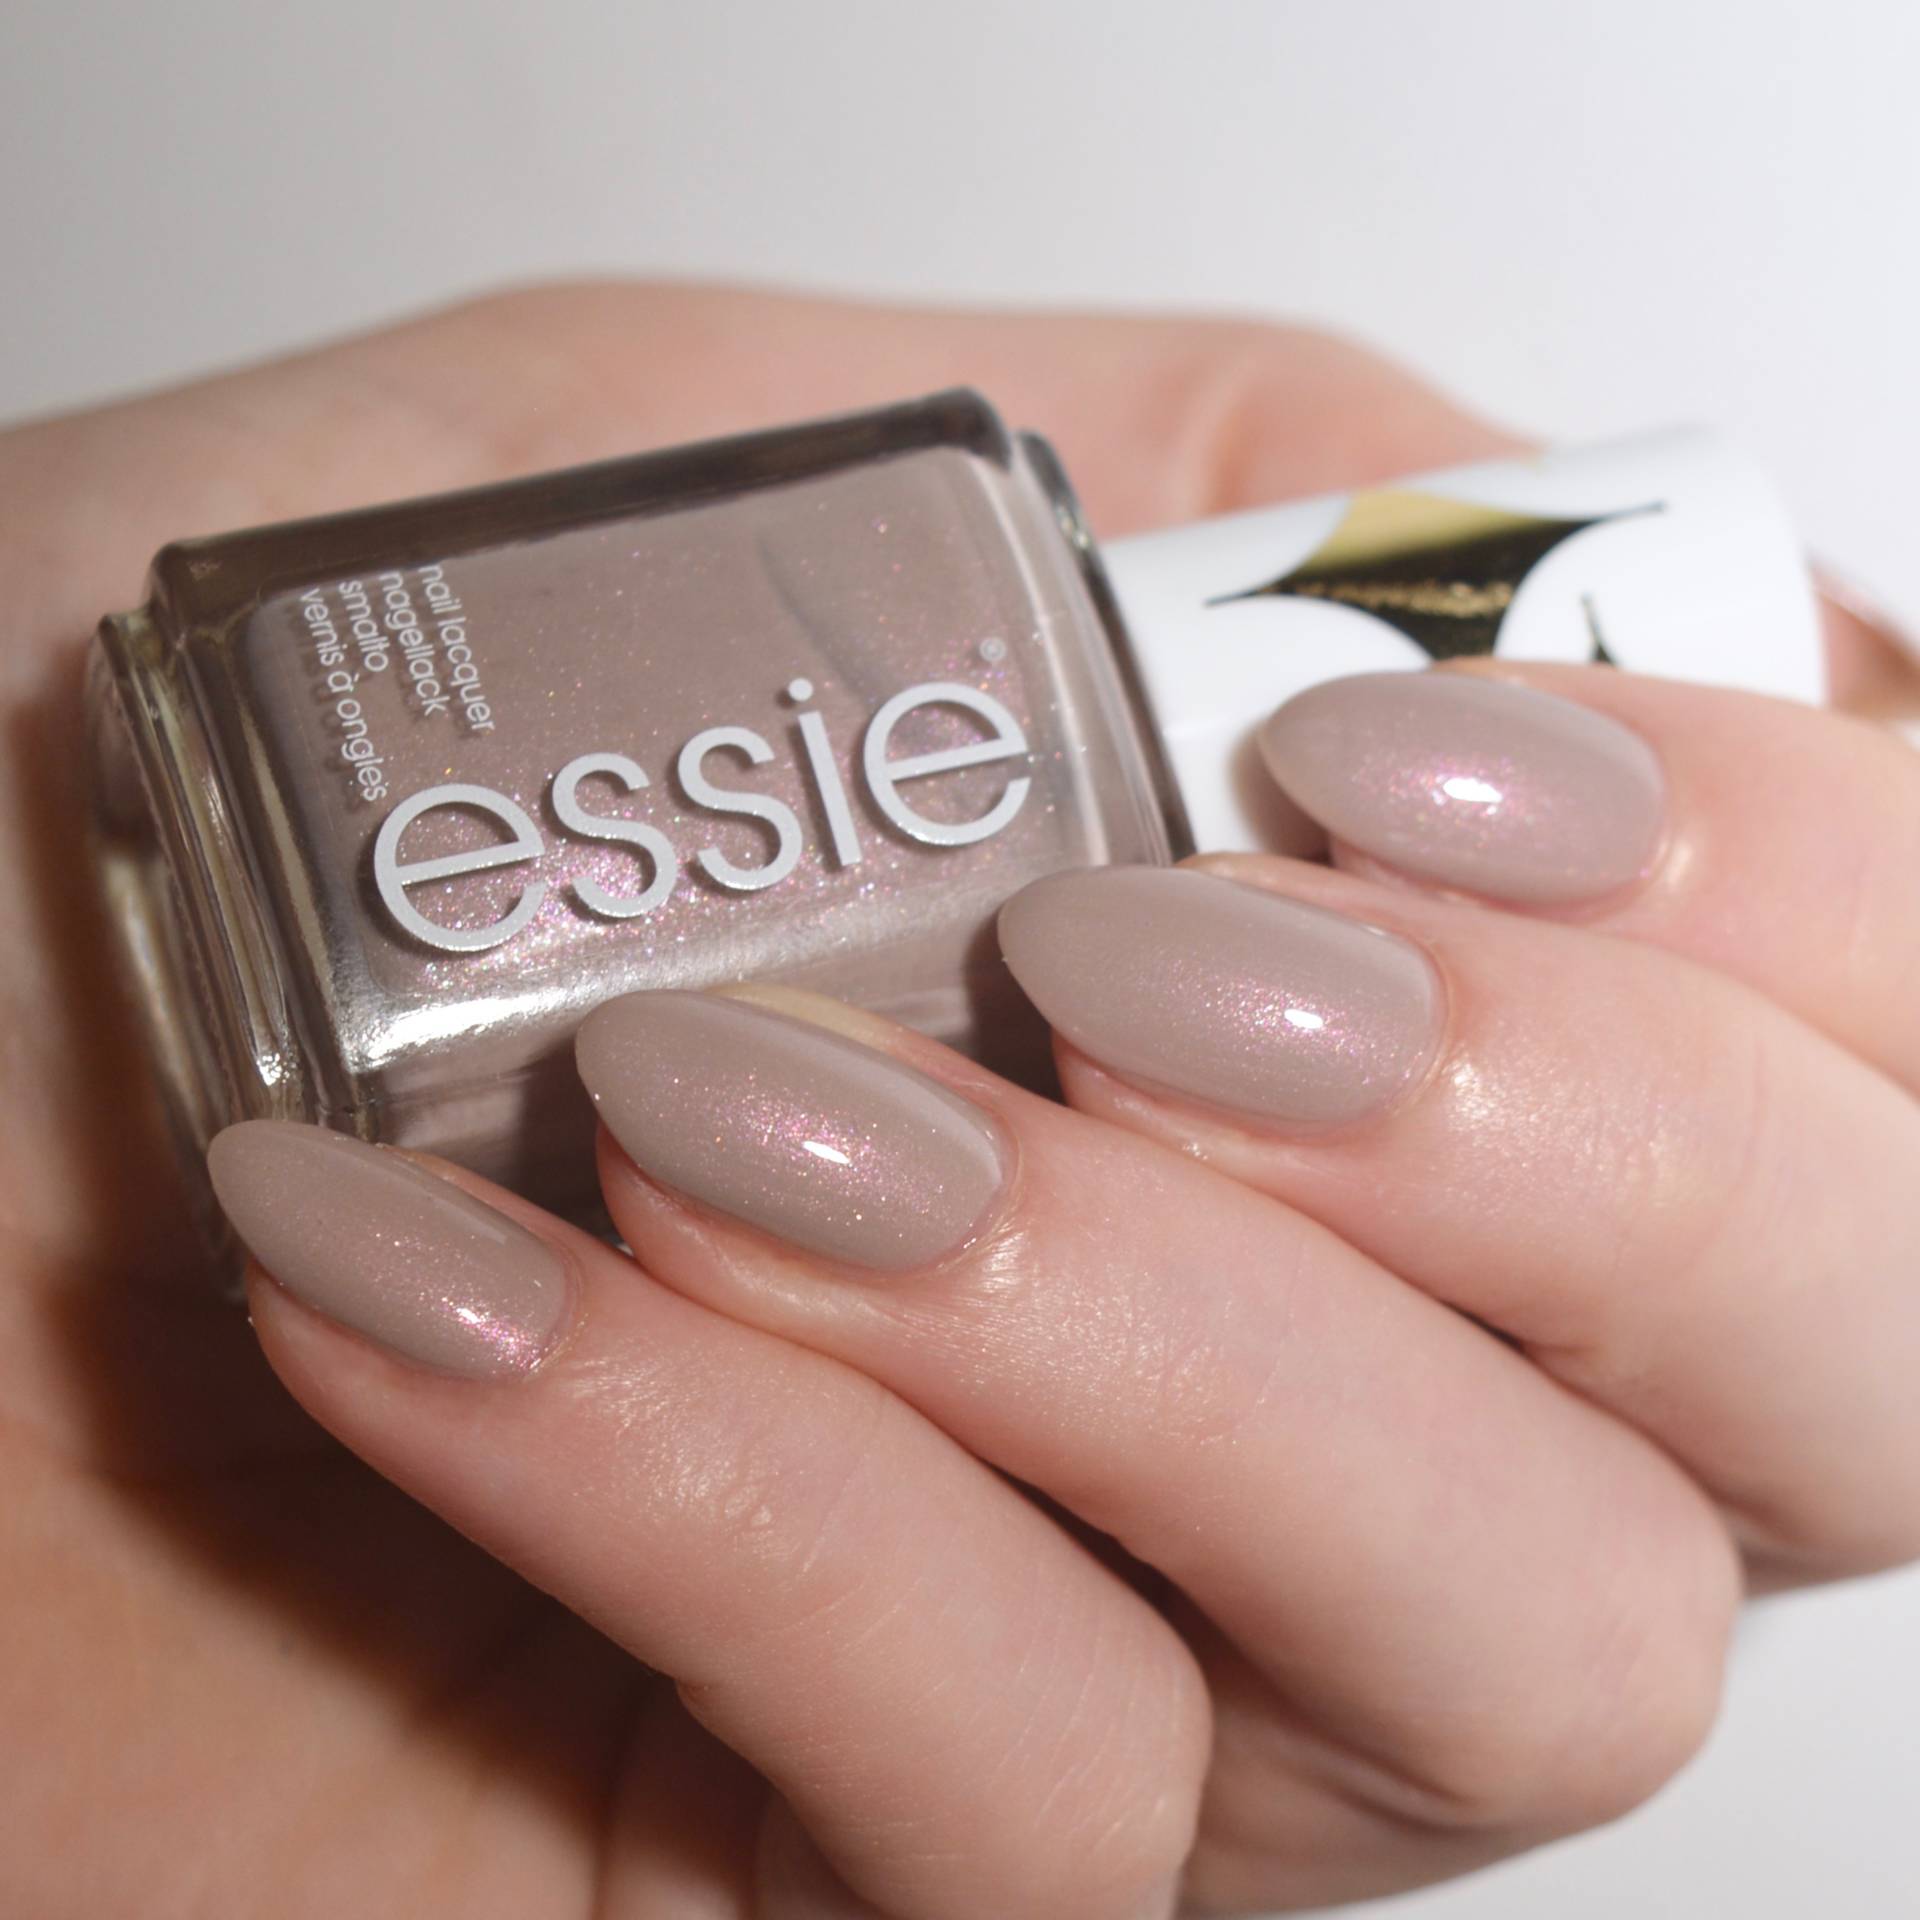 Essie 'Sweet Tart' from the Retro Revival 2017 collection. The perfect grey polish with subtle pink shimmer.